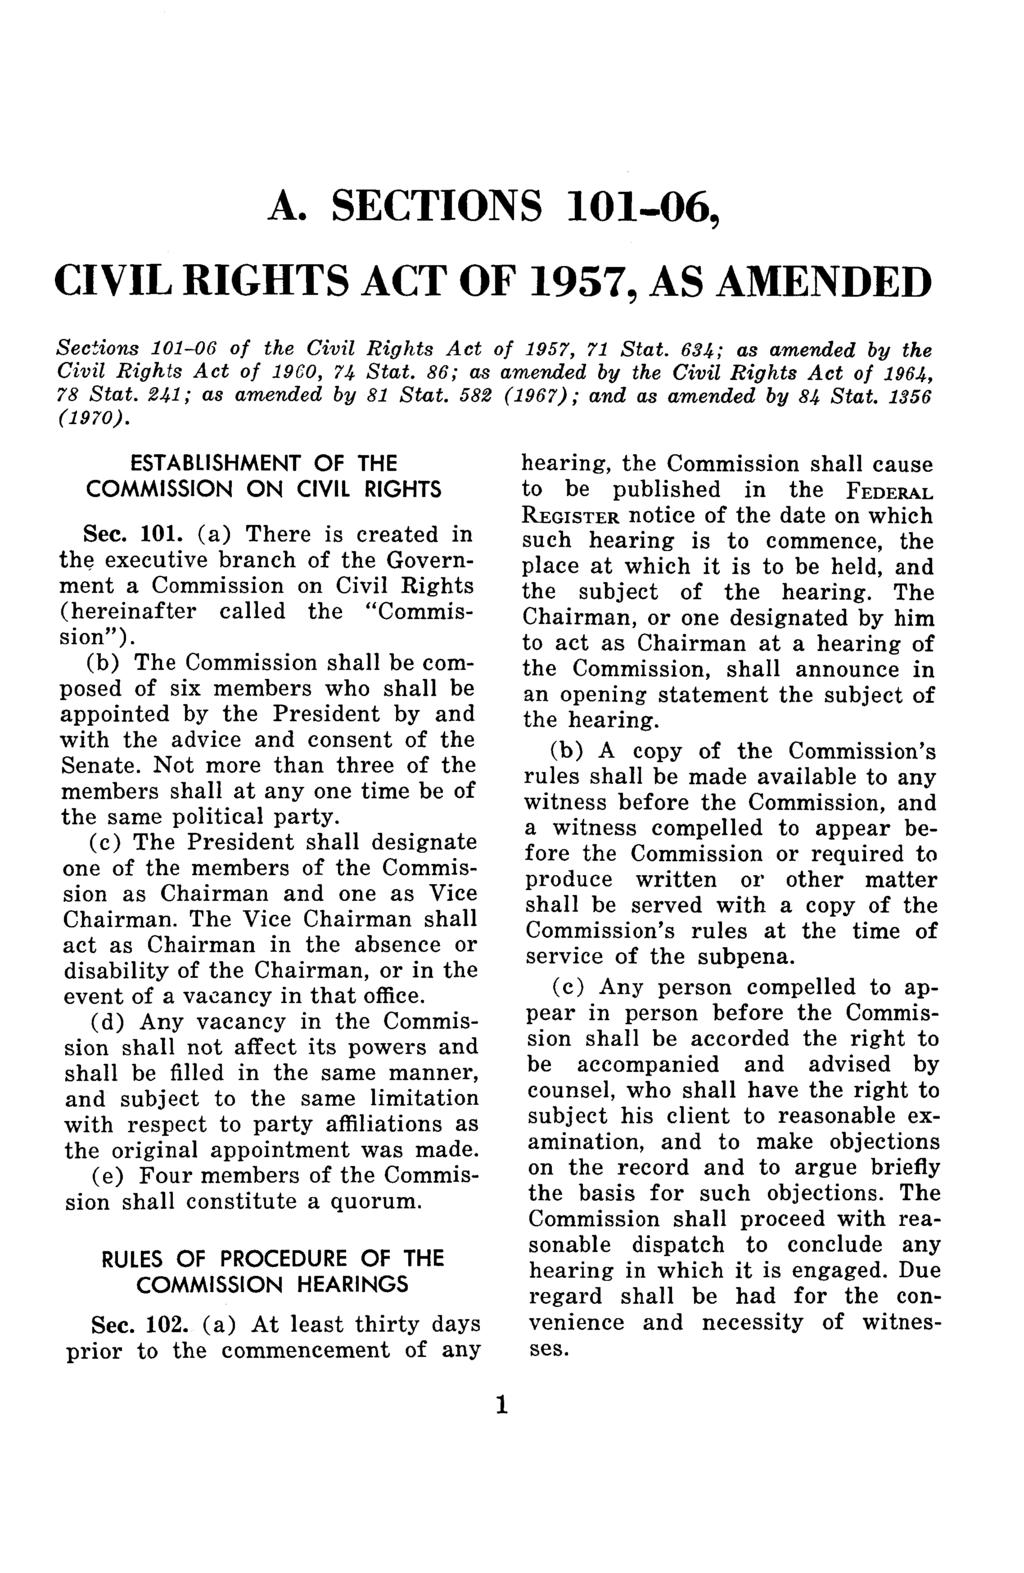 A. SECTIONS 101-06, CIVIL RIGHTS ACT OF 1957, AS AMENDED Sections 101-06 of the Civil Rights Act of 1957, 71 Stat. 634; as amended by the Civil Rights Act of 1960, 74 Stat.